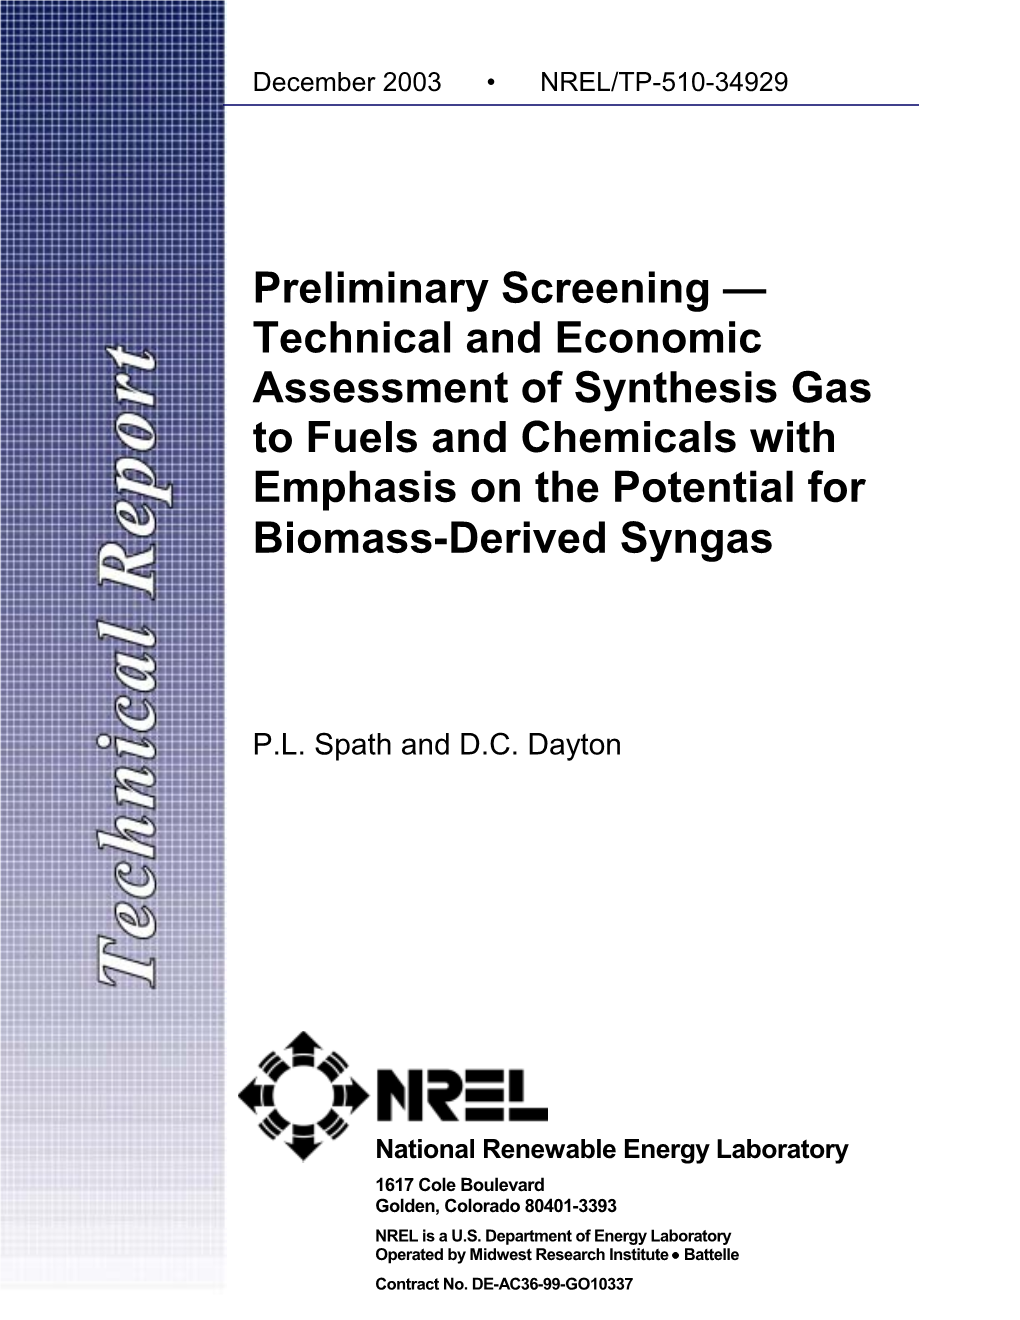 Technical and Economic Assessment of Synthesis Gas to Fuels and Chemicals with Emphasis on the Potential for Biomass-Derived Syngas